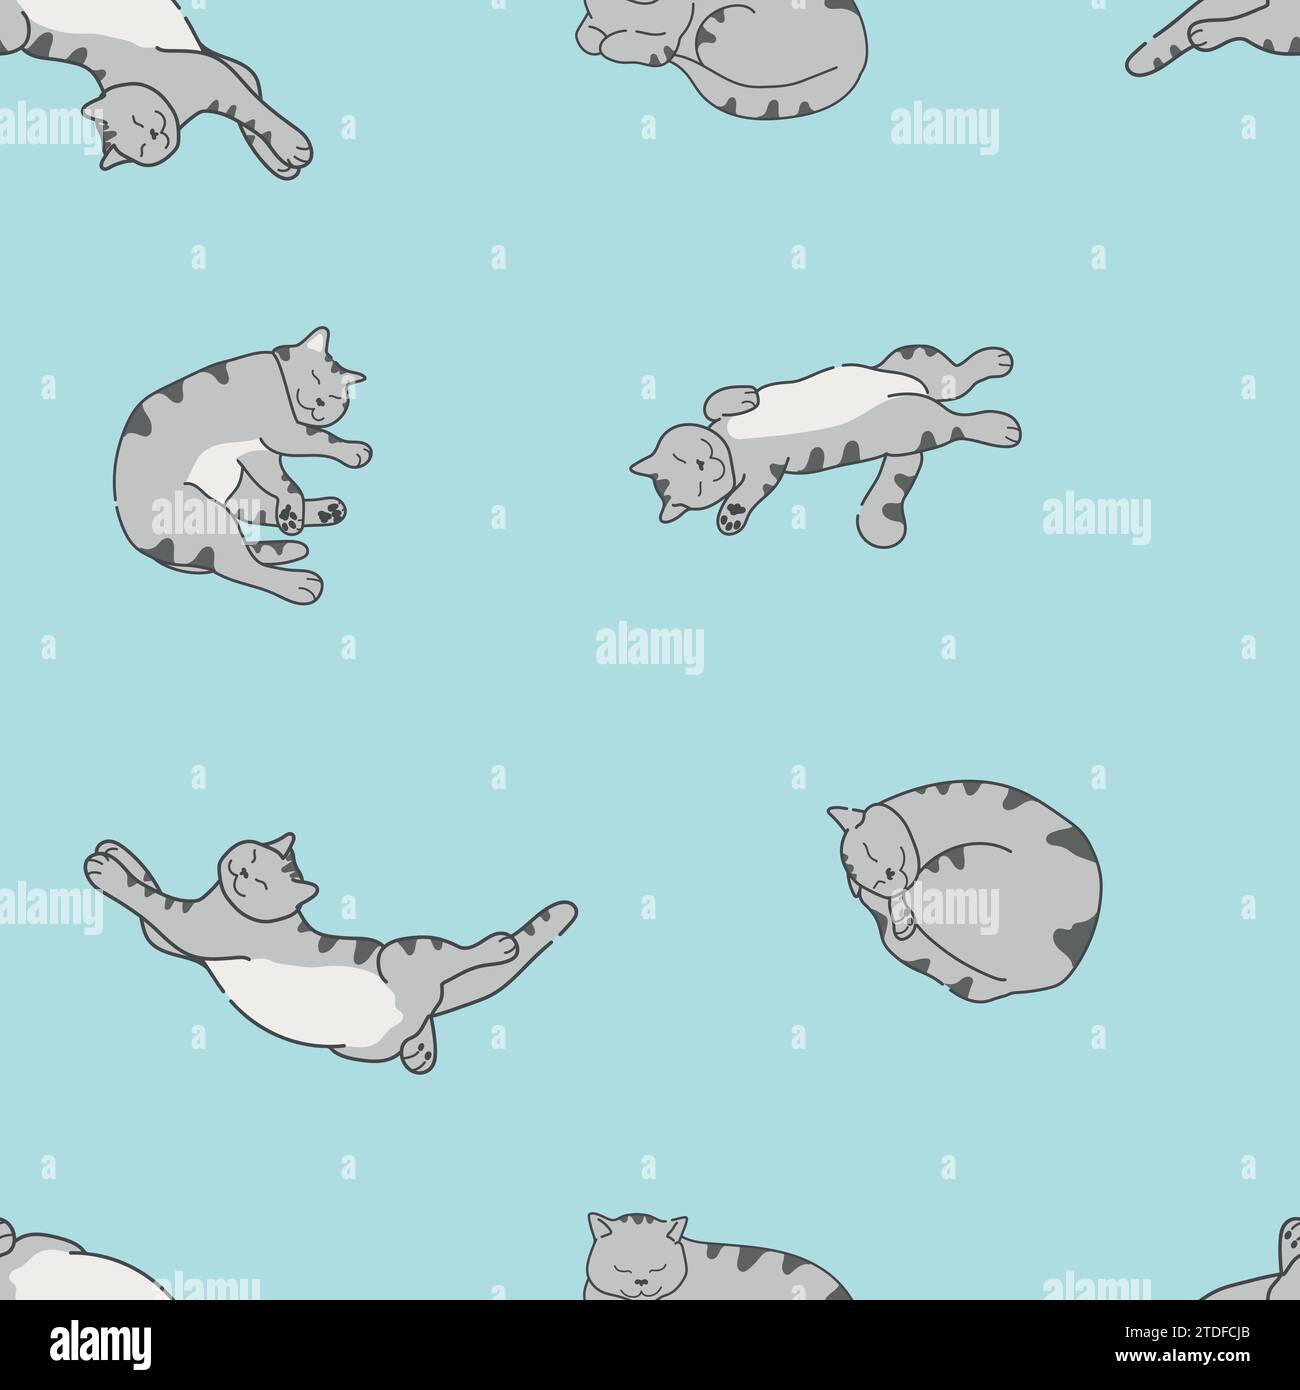 Cute sleepy grey cat seamless pattern. Grey tabby cat is sleeping in different poses. Vector illustration Stock Vector